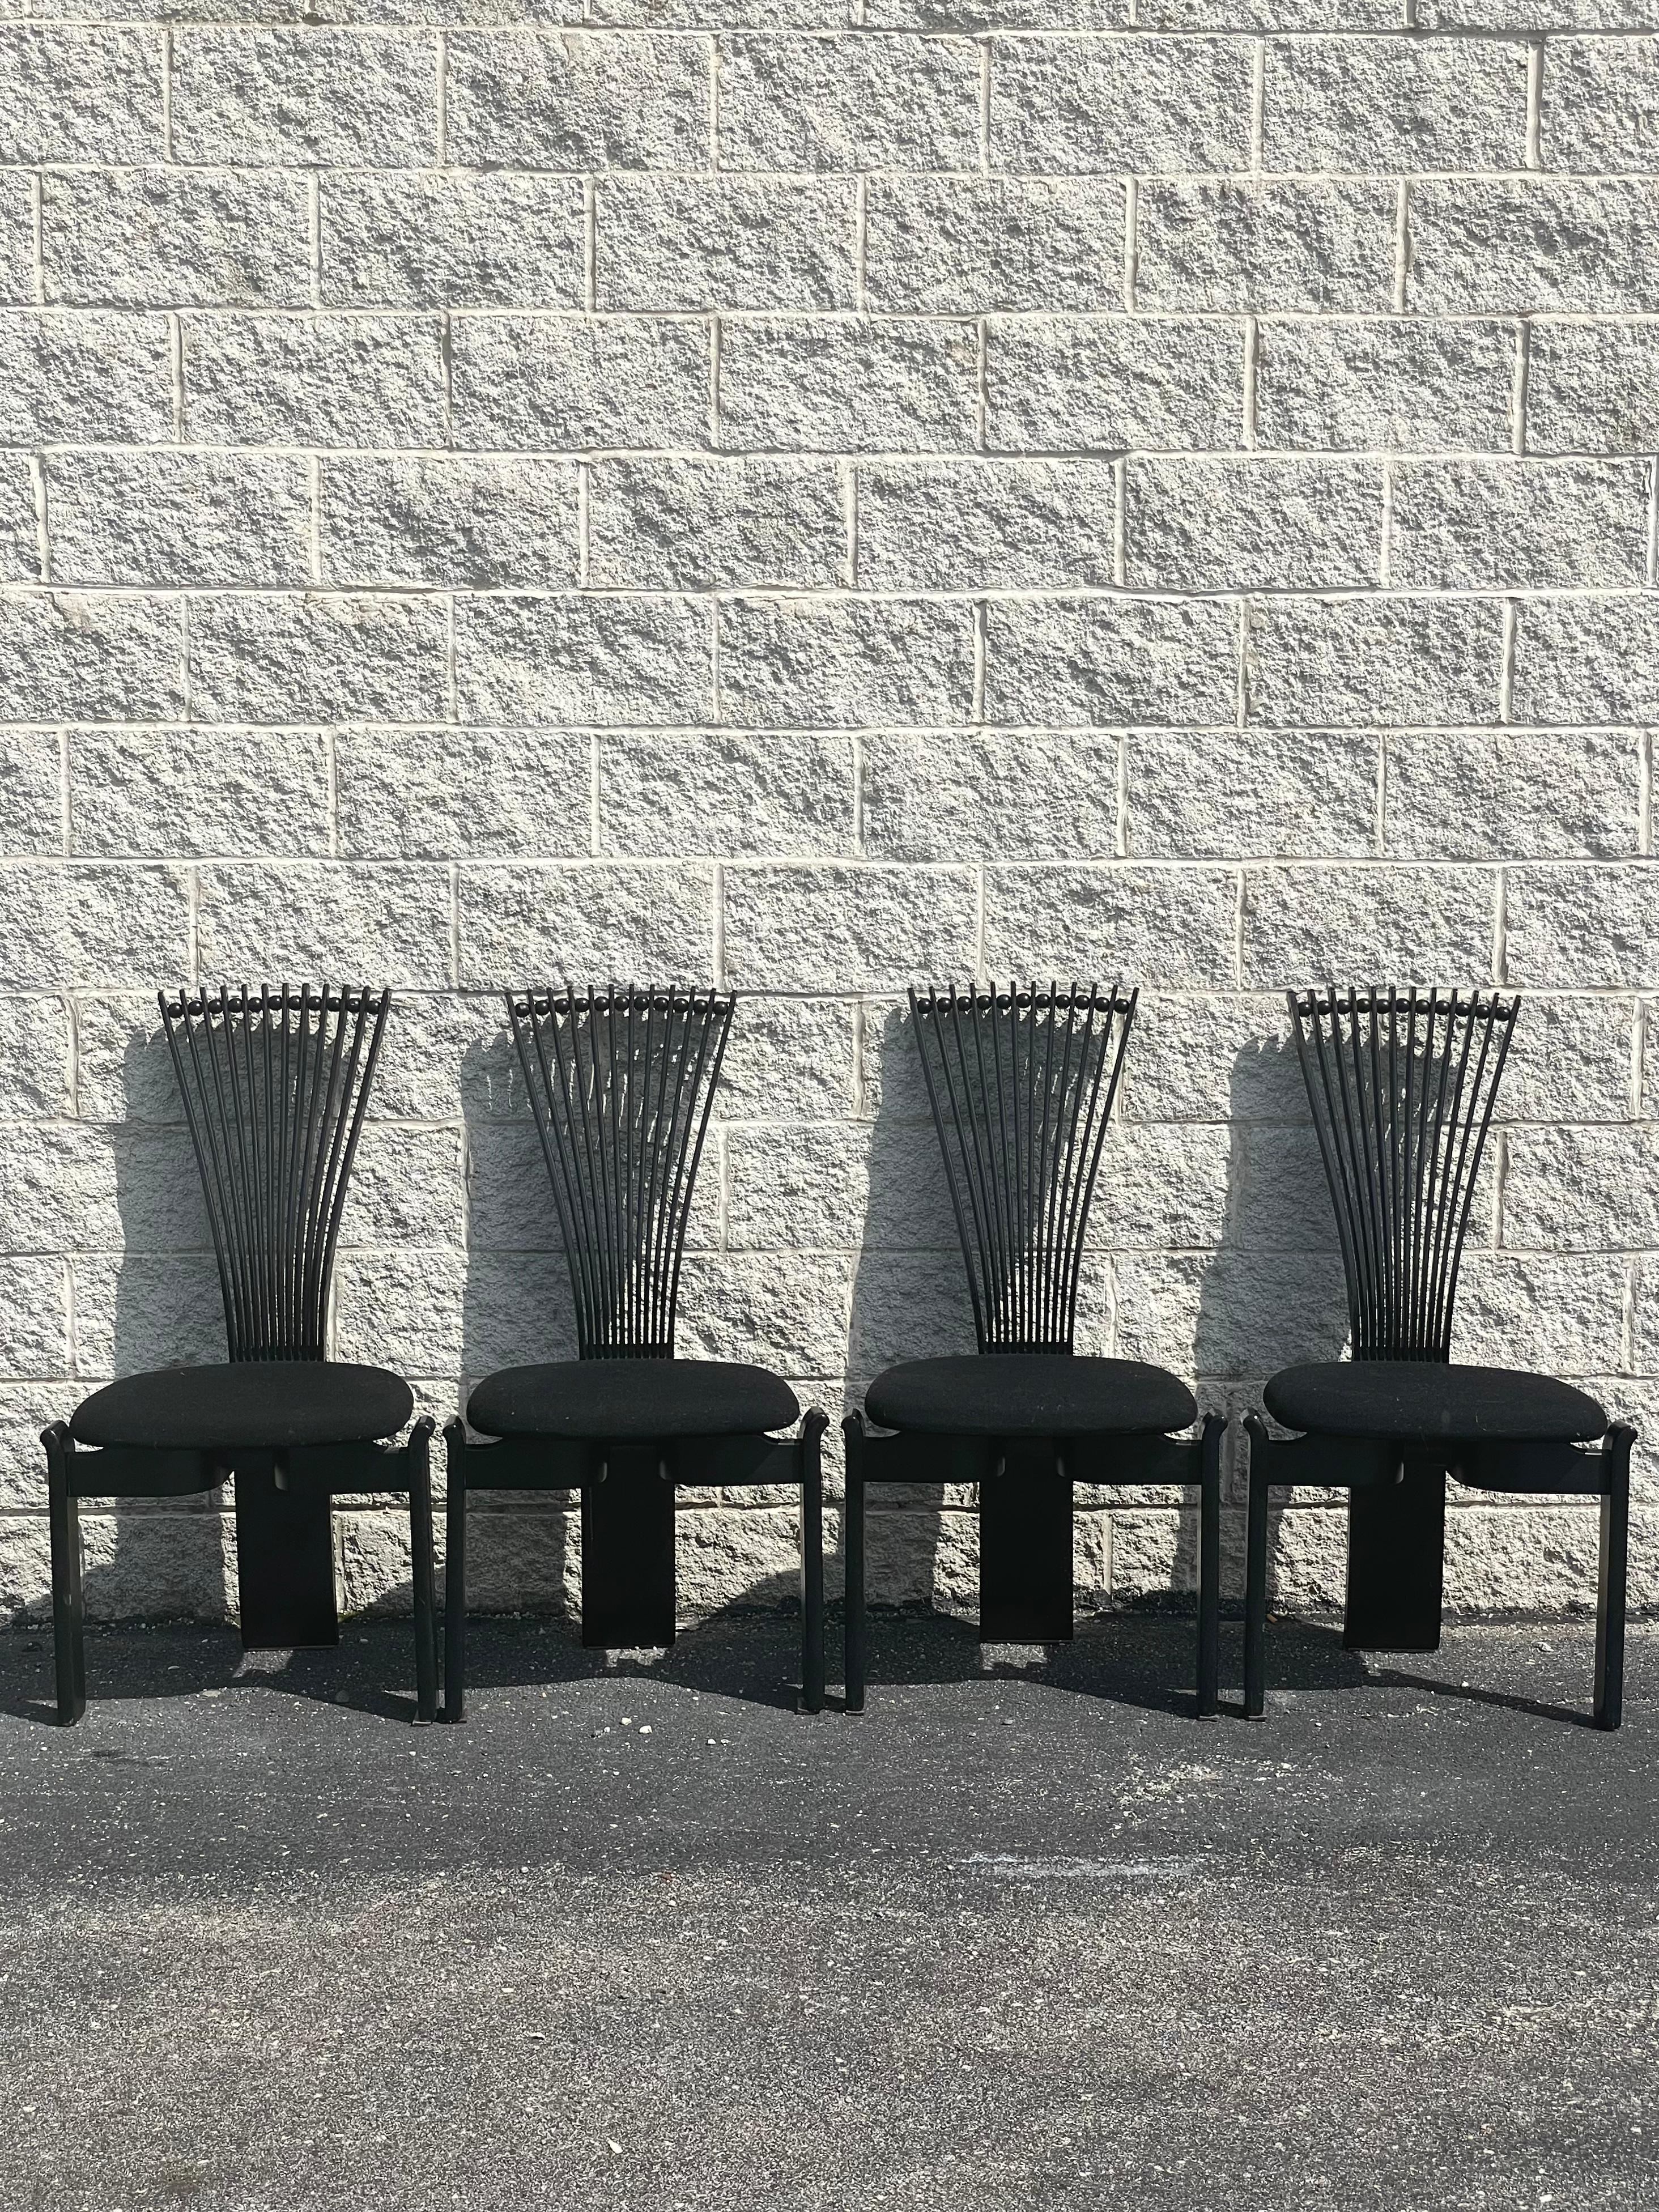 A wonderful set of black lacquer “Totem” chairs by Torstein Nilsen for Westnofa. Minor wear throughout consistent with age and use.